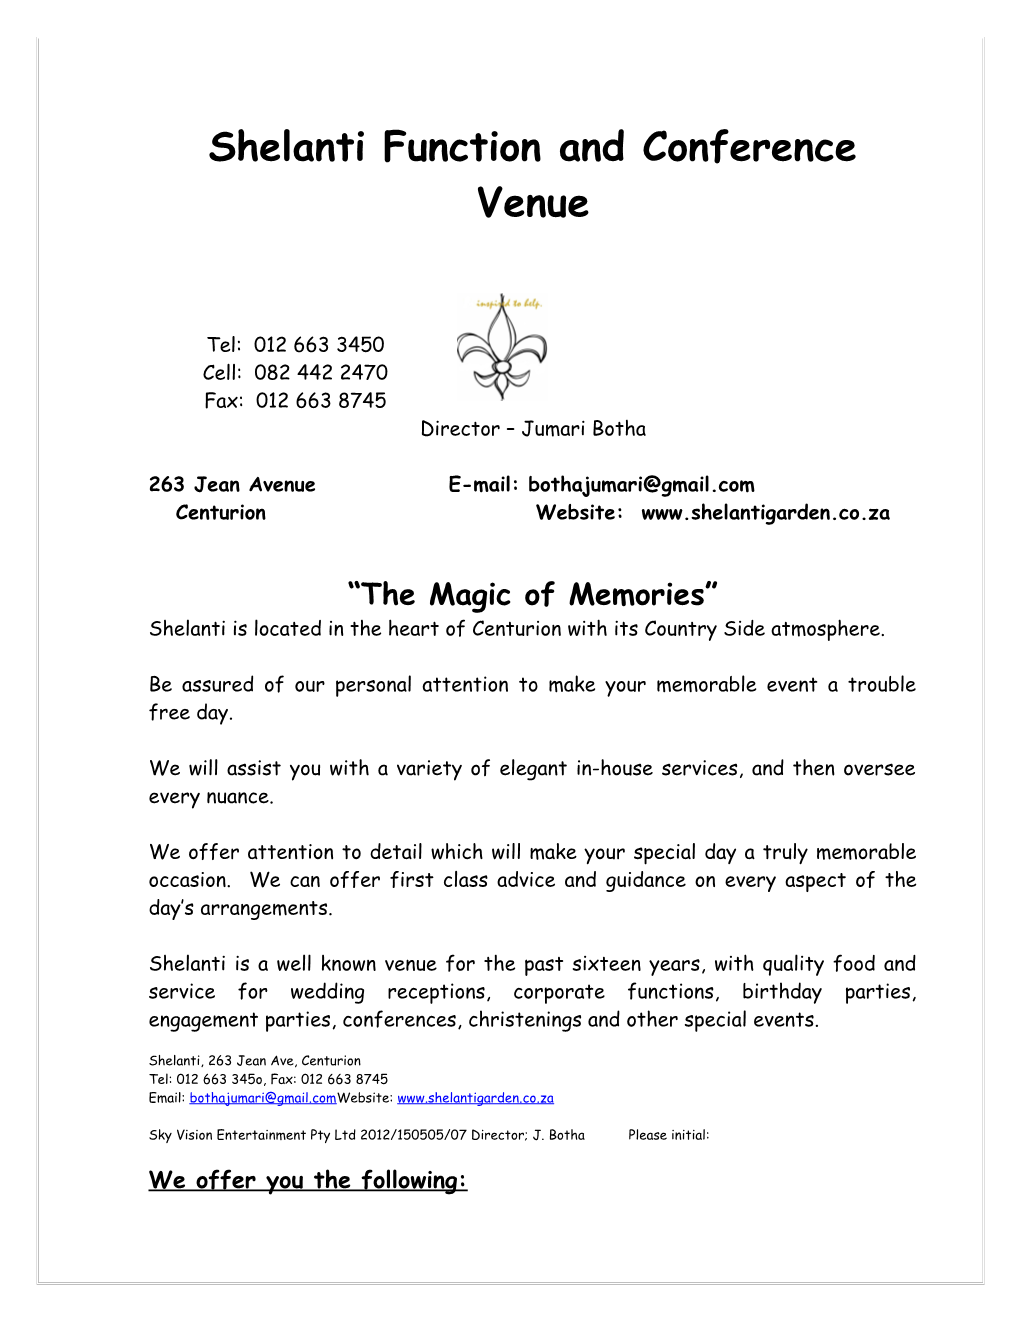 Shelanti Function and Conference Venue